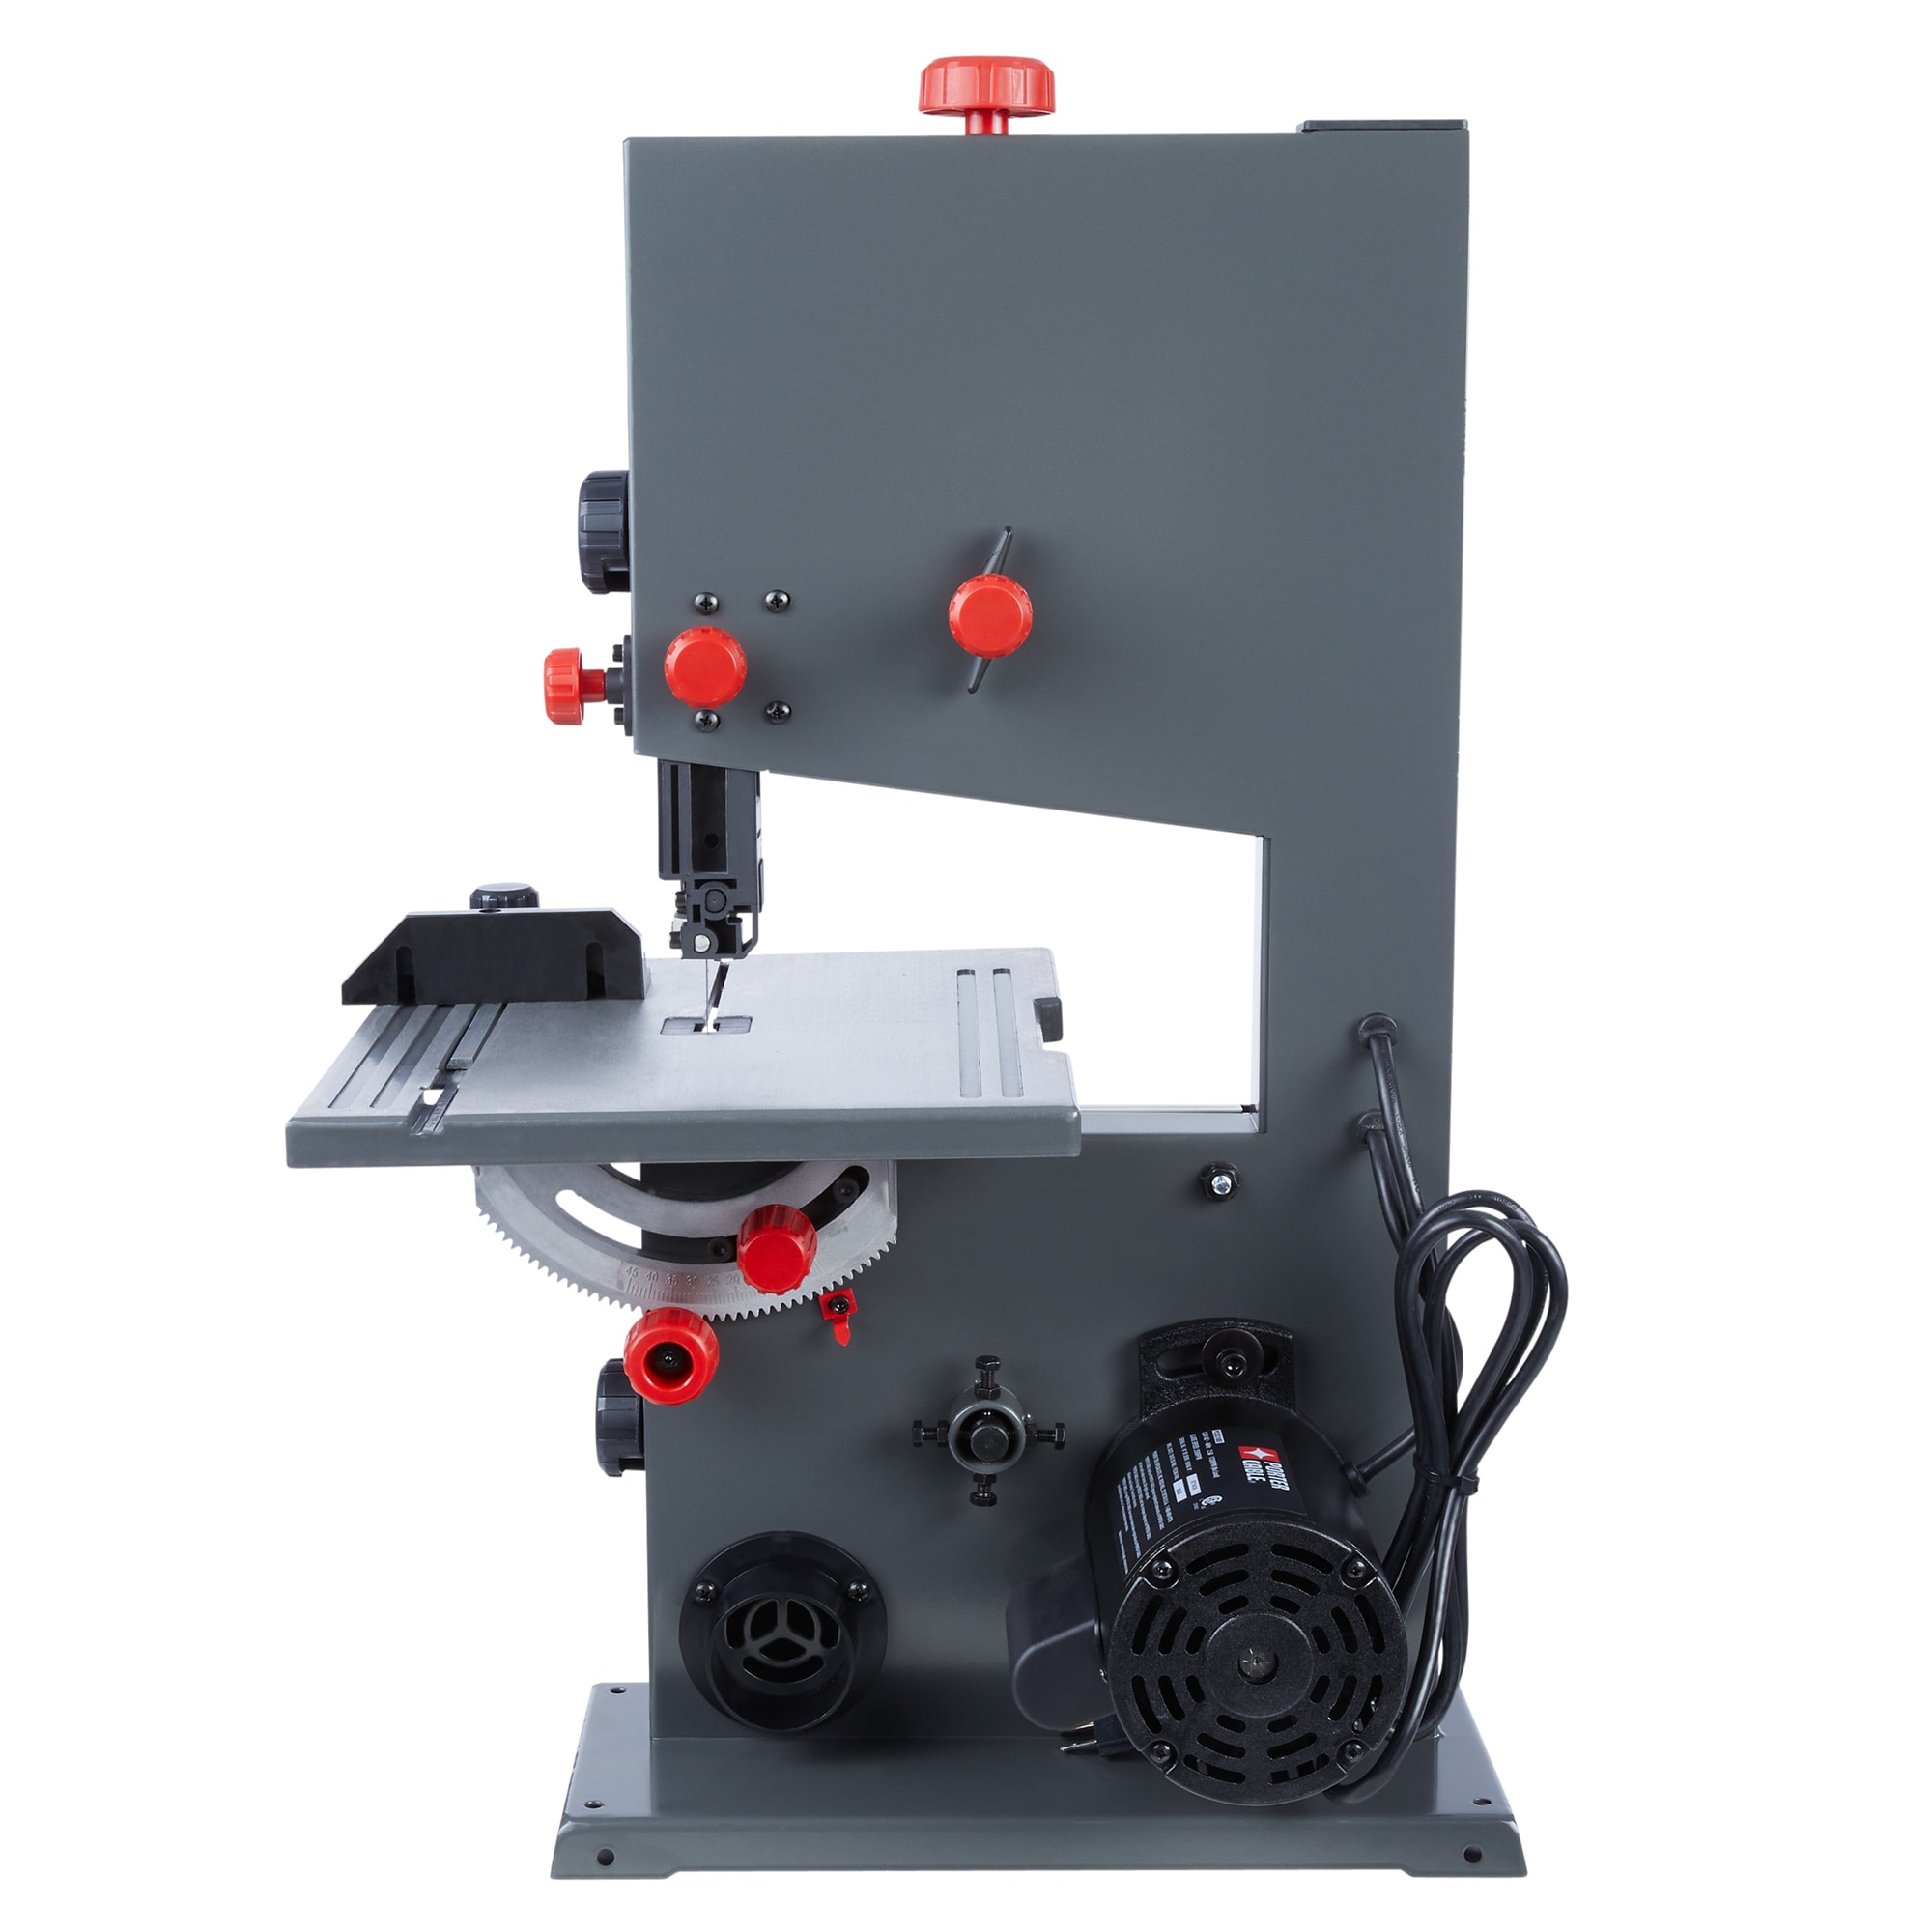 PORTER-CABLE PCXB310BS 9-in 2.5-Amp Stationary Band Saw - 2